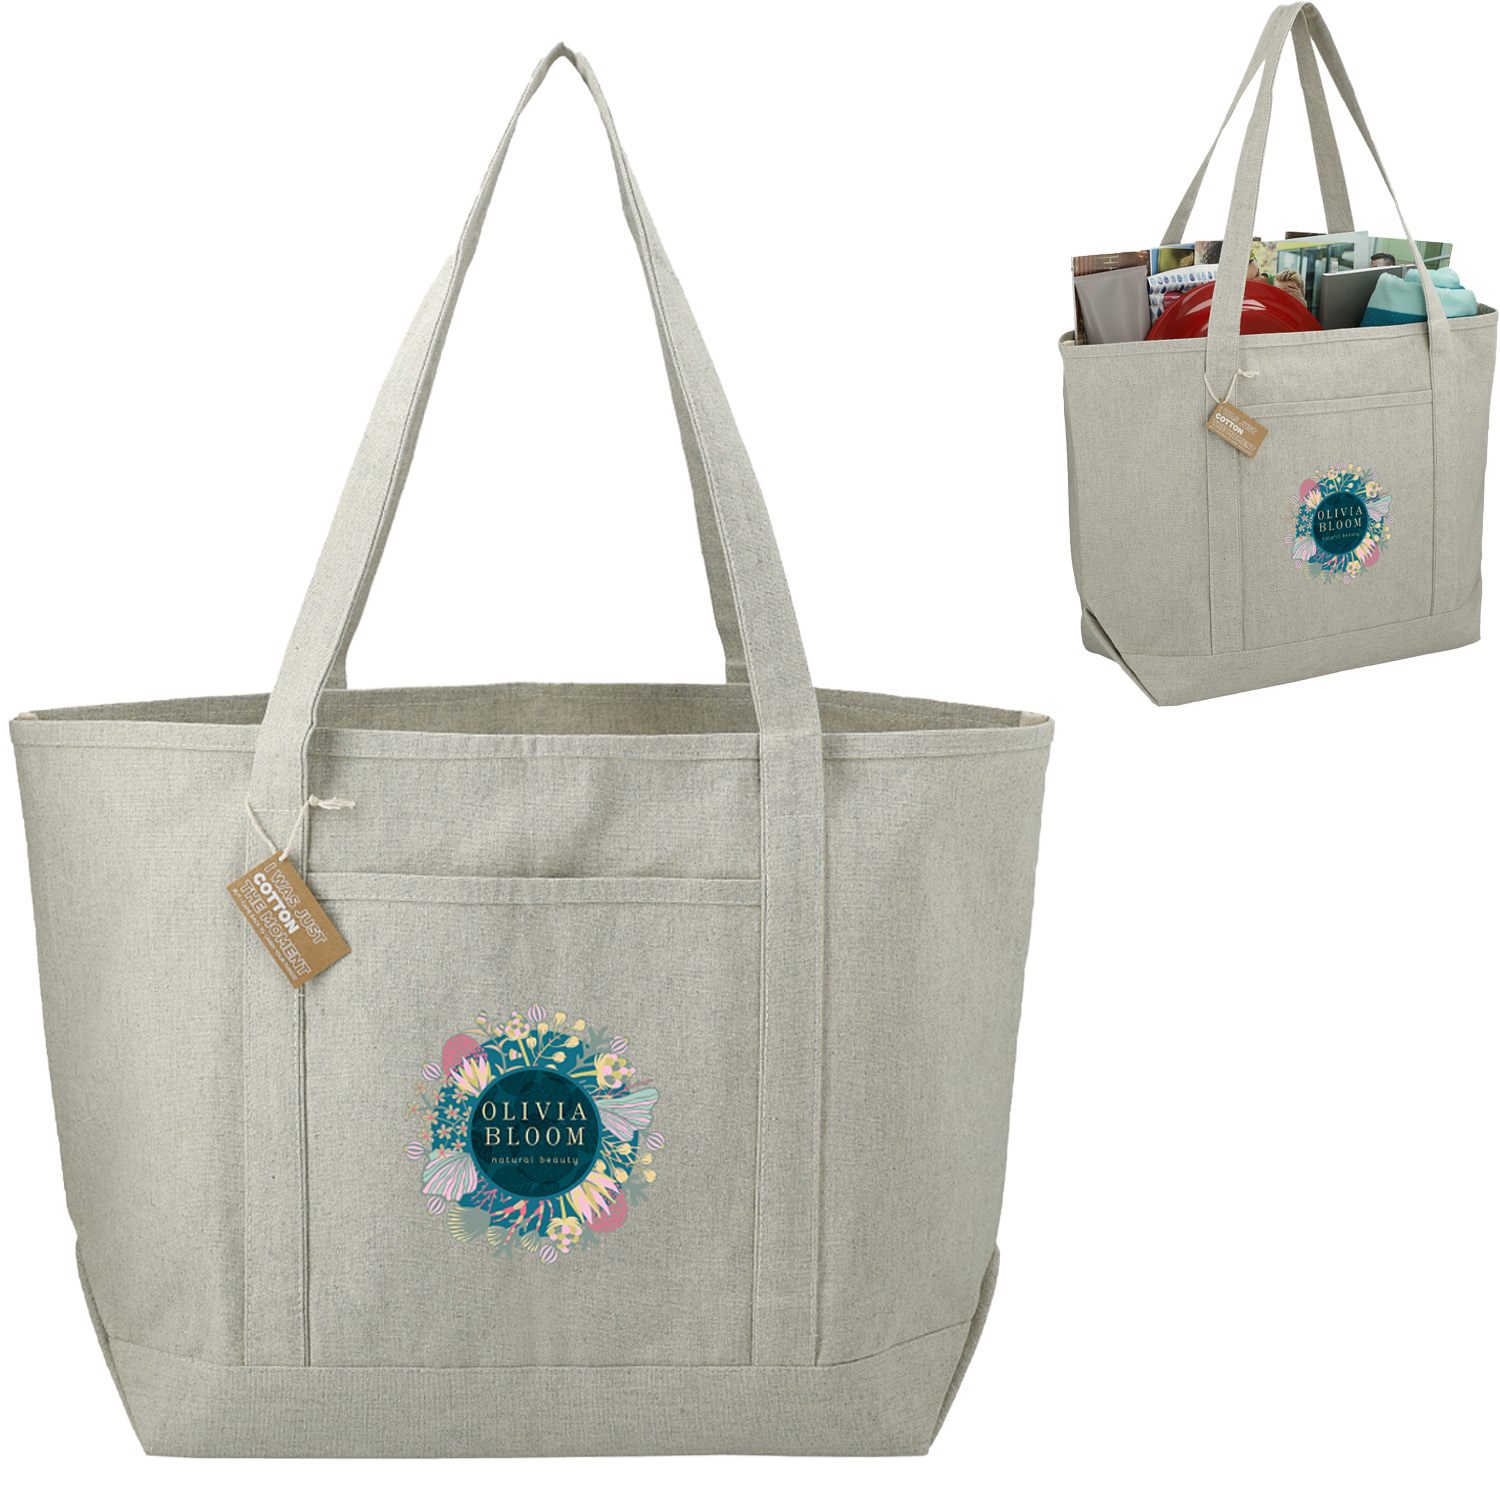 Recycled Cotton Boat Tote 14x21